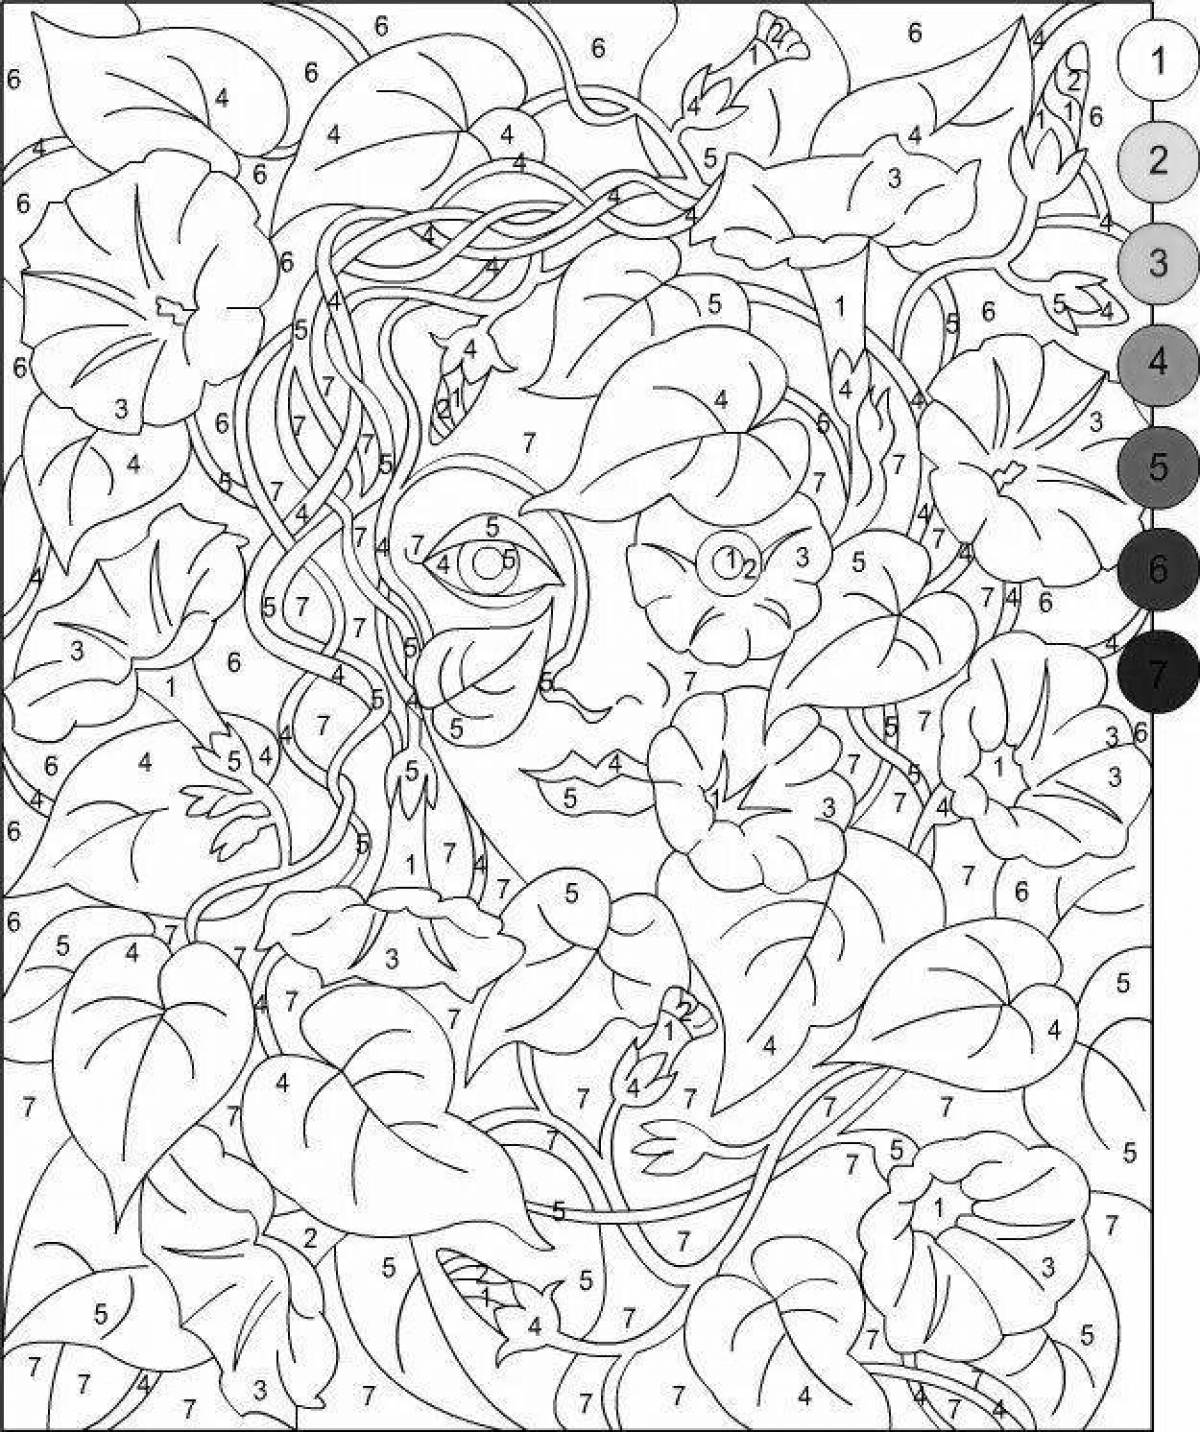 Creative license plate coloring page